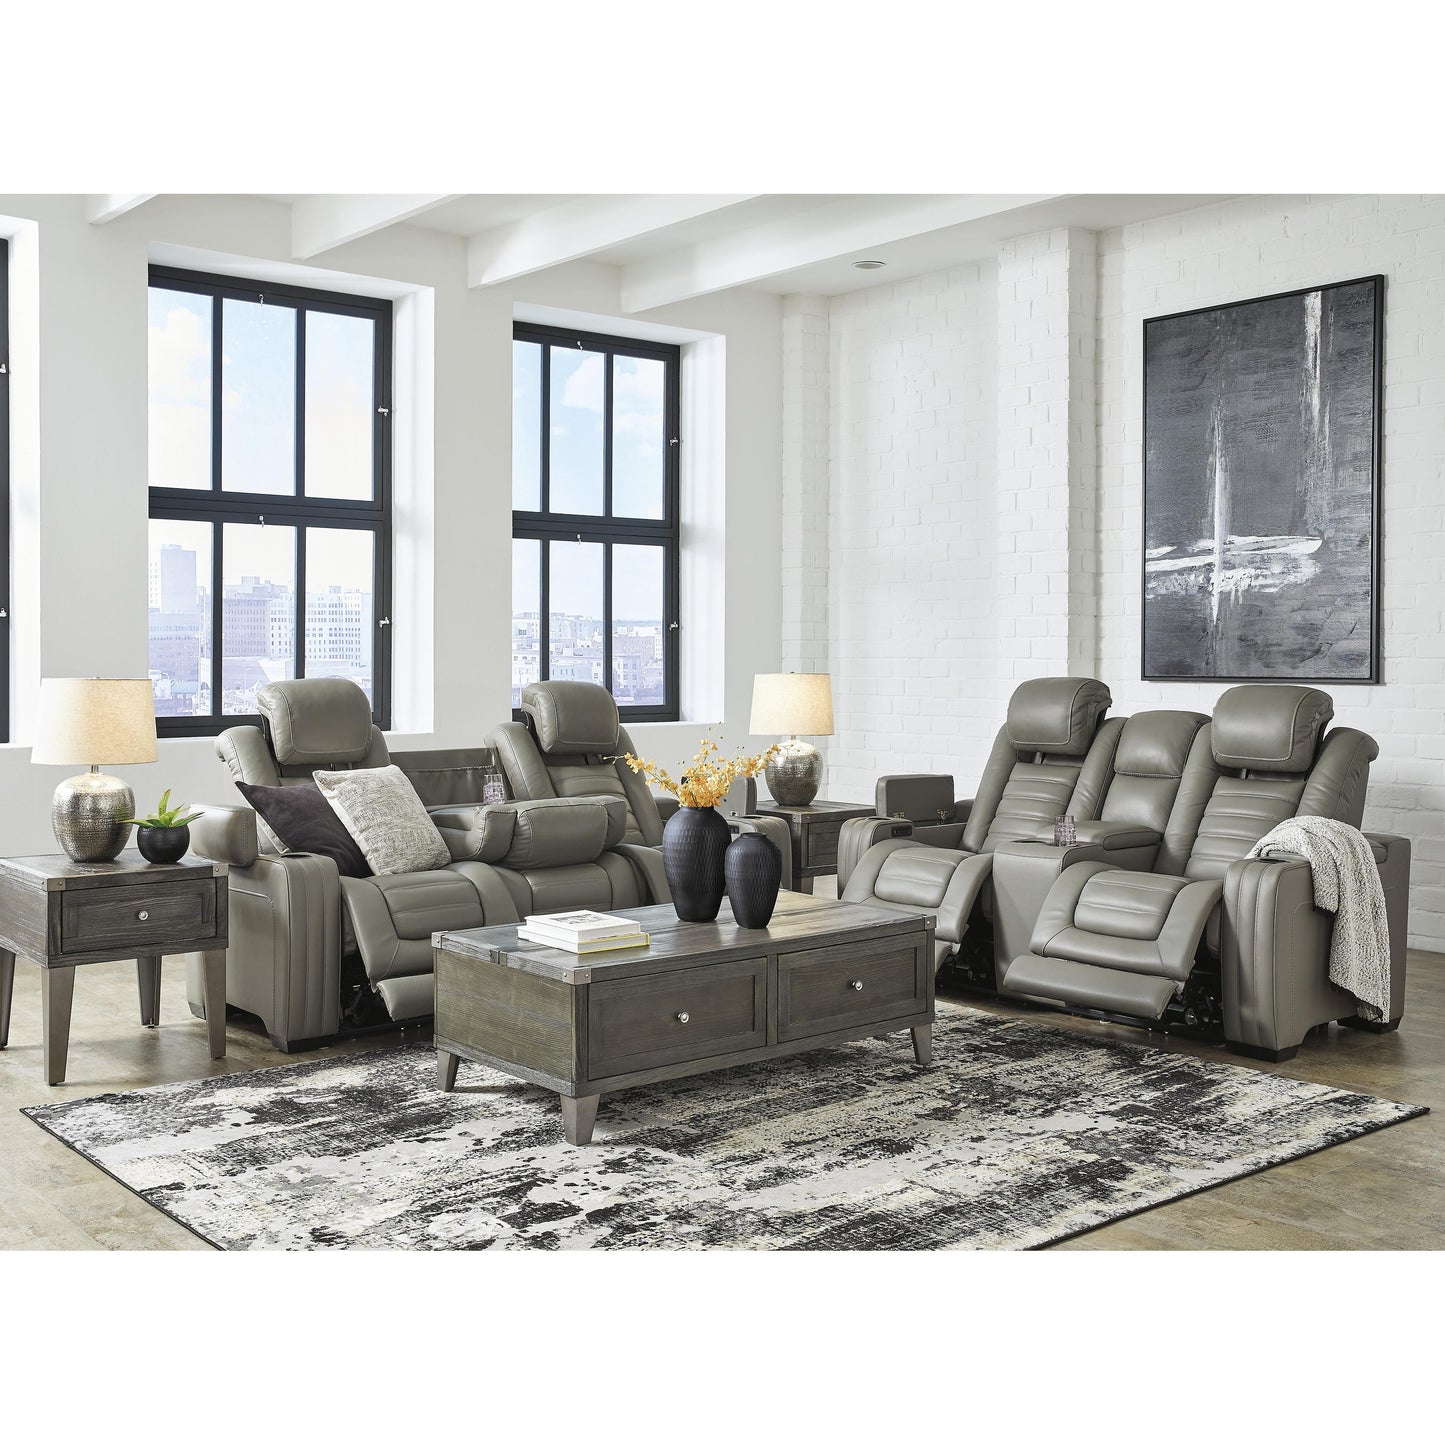 Signature Design by Ashley Backtrack Power Reclining Leather Match Loveseat U2800518 IMAGE 10